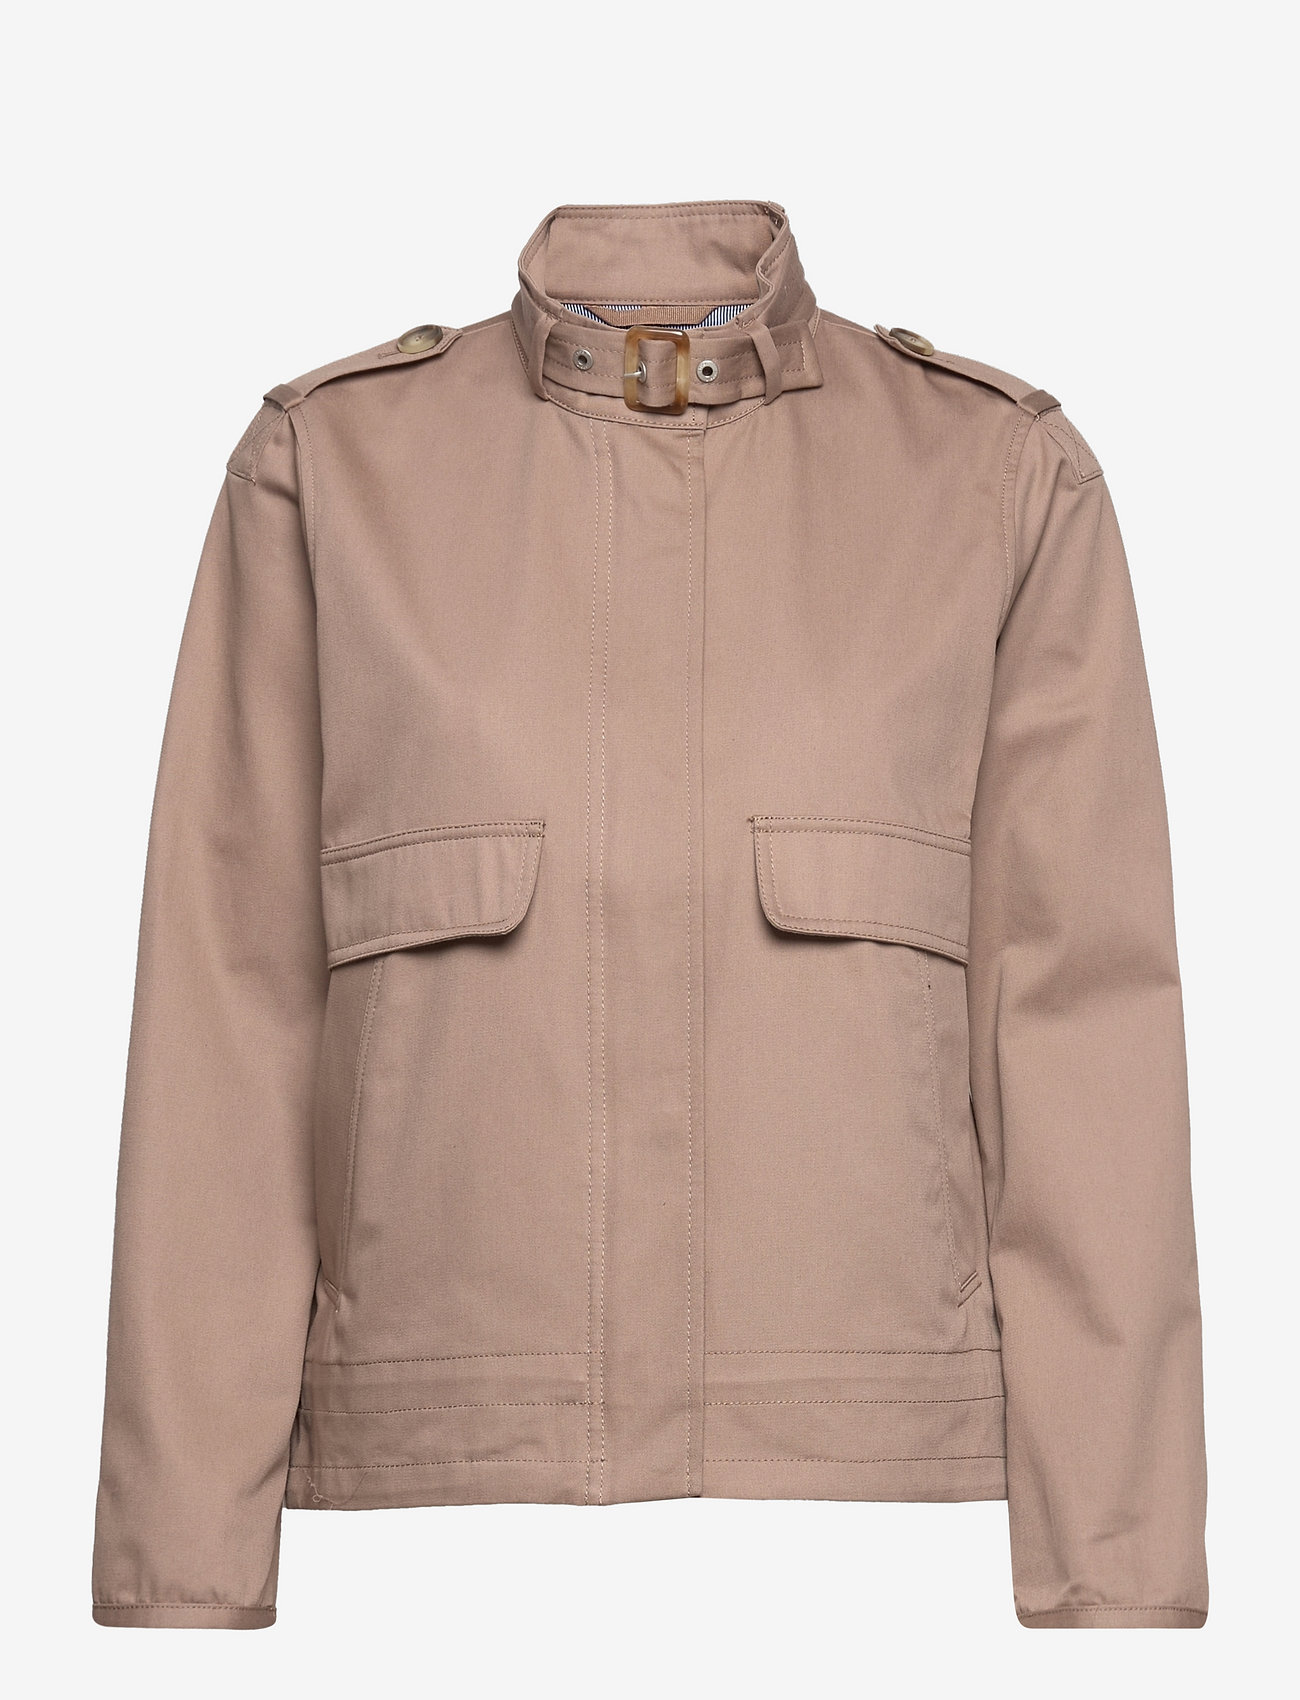 Esprit Casual - Outdoor jacket - utility-takit - taupe - 0